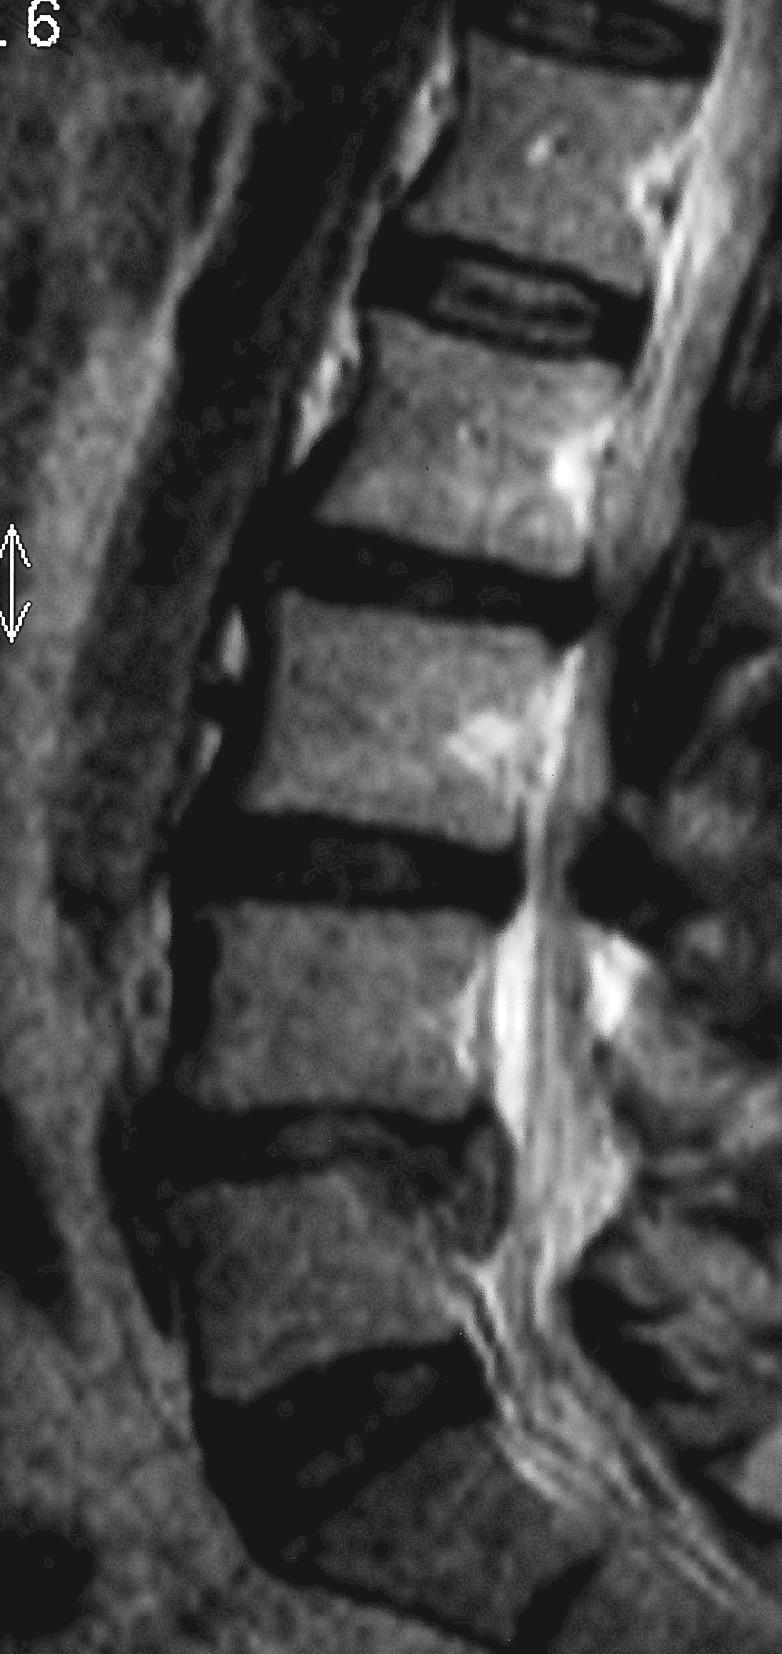 Post-discectomy low back pain unloaded under load